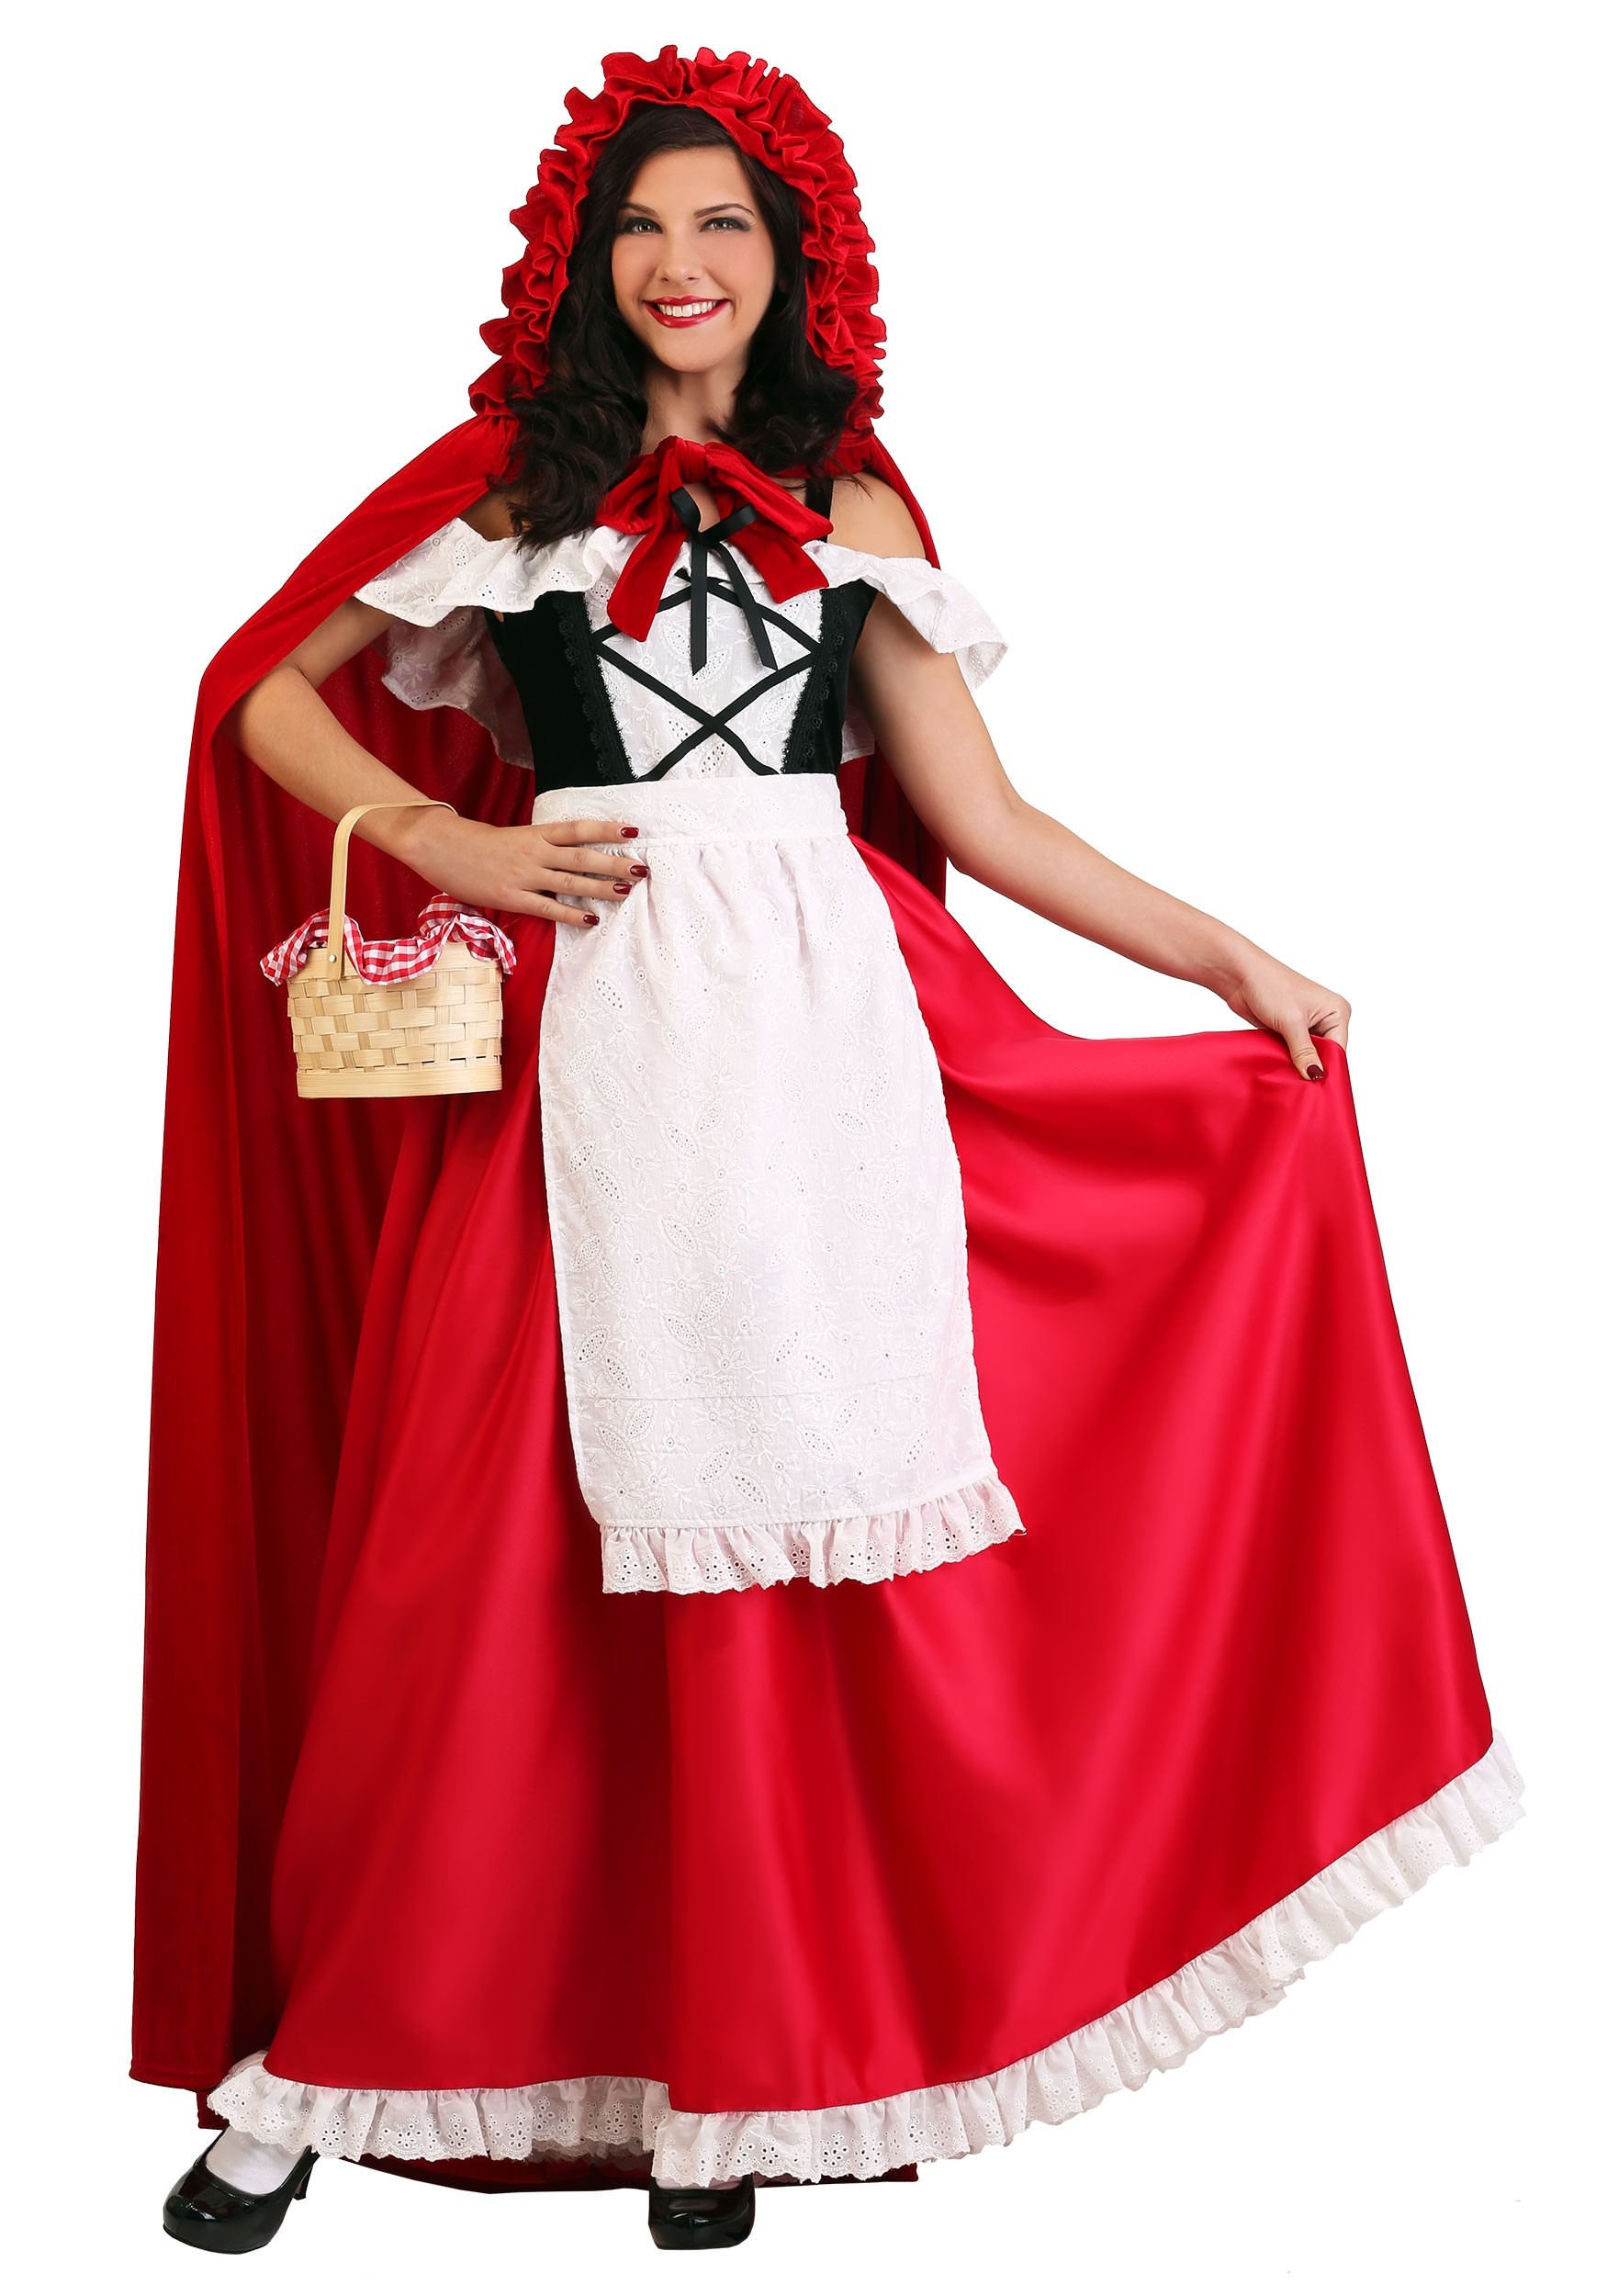 Women’s Deluxe Red Riding Hood Costume